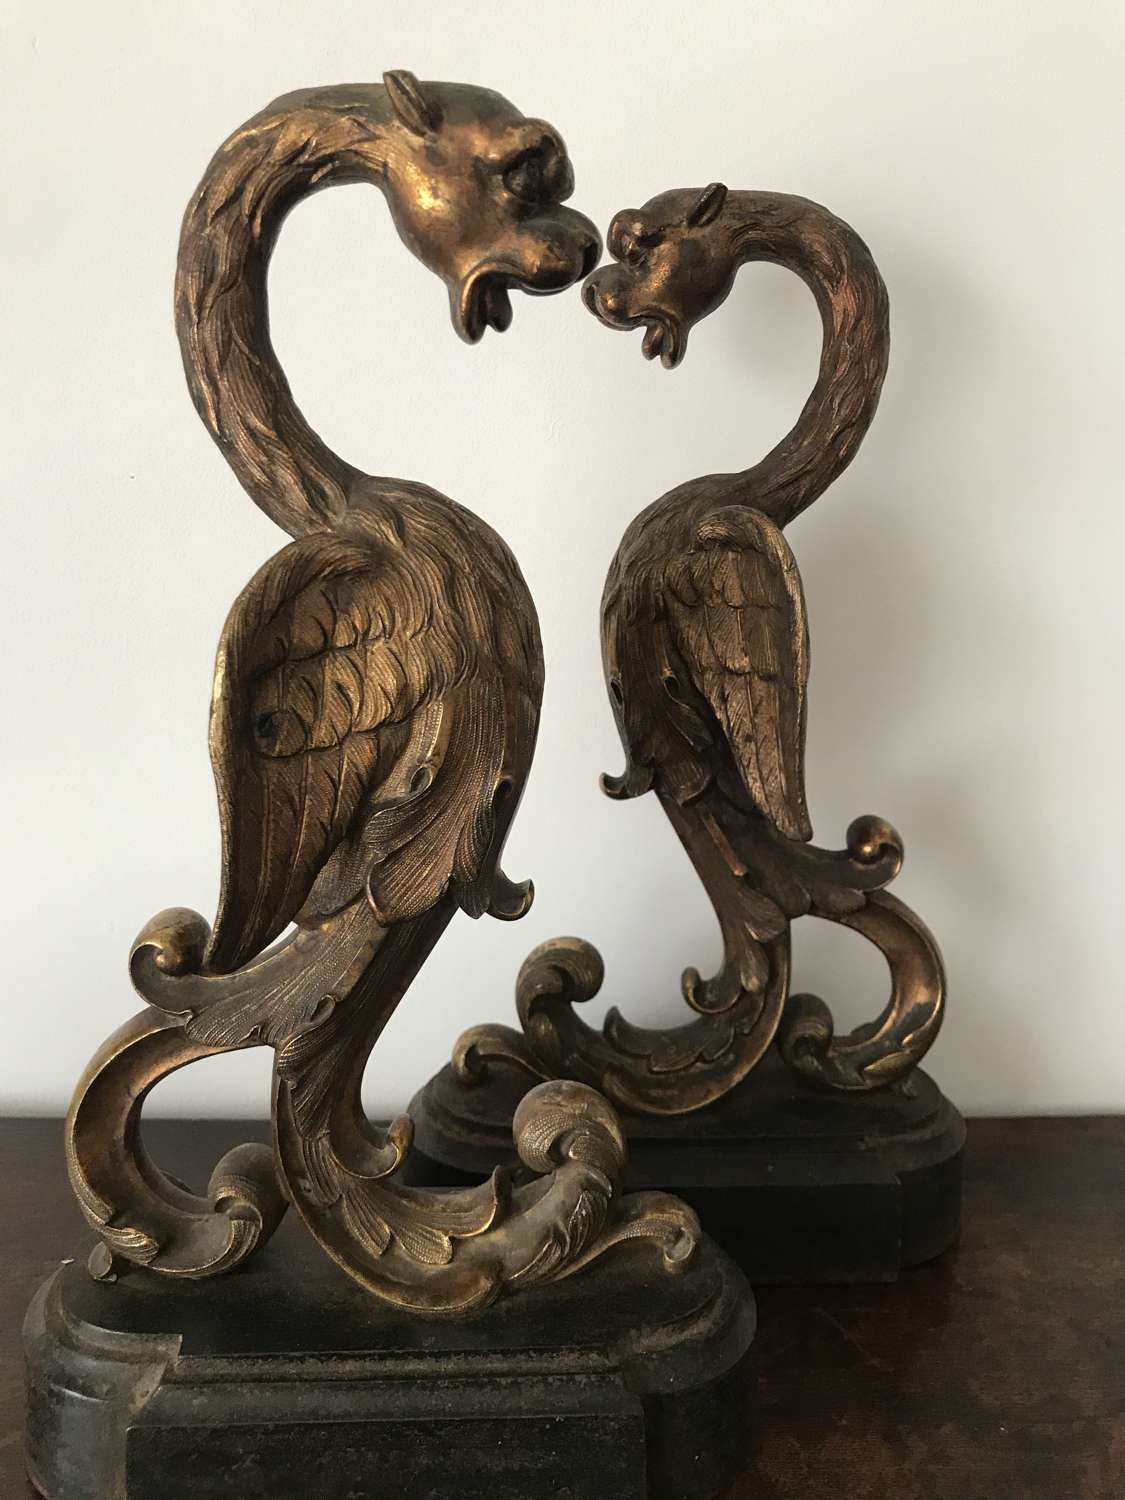 19th century Cast and Gilded pair of Gryphons